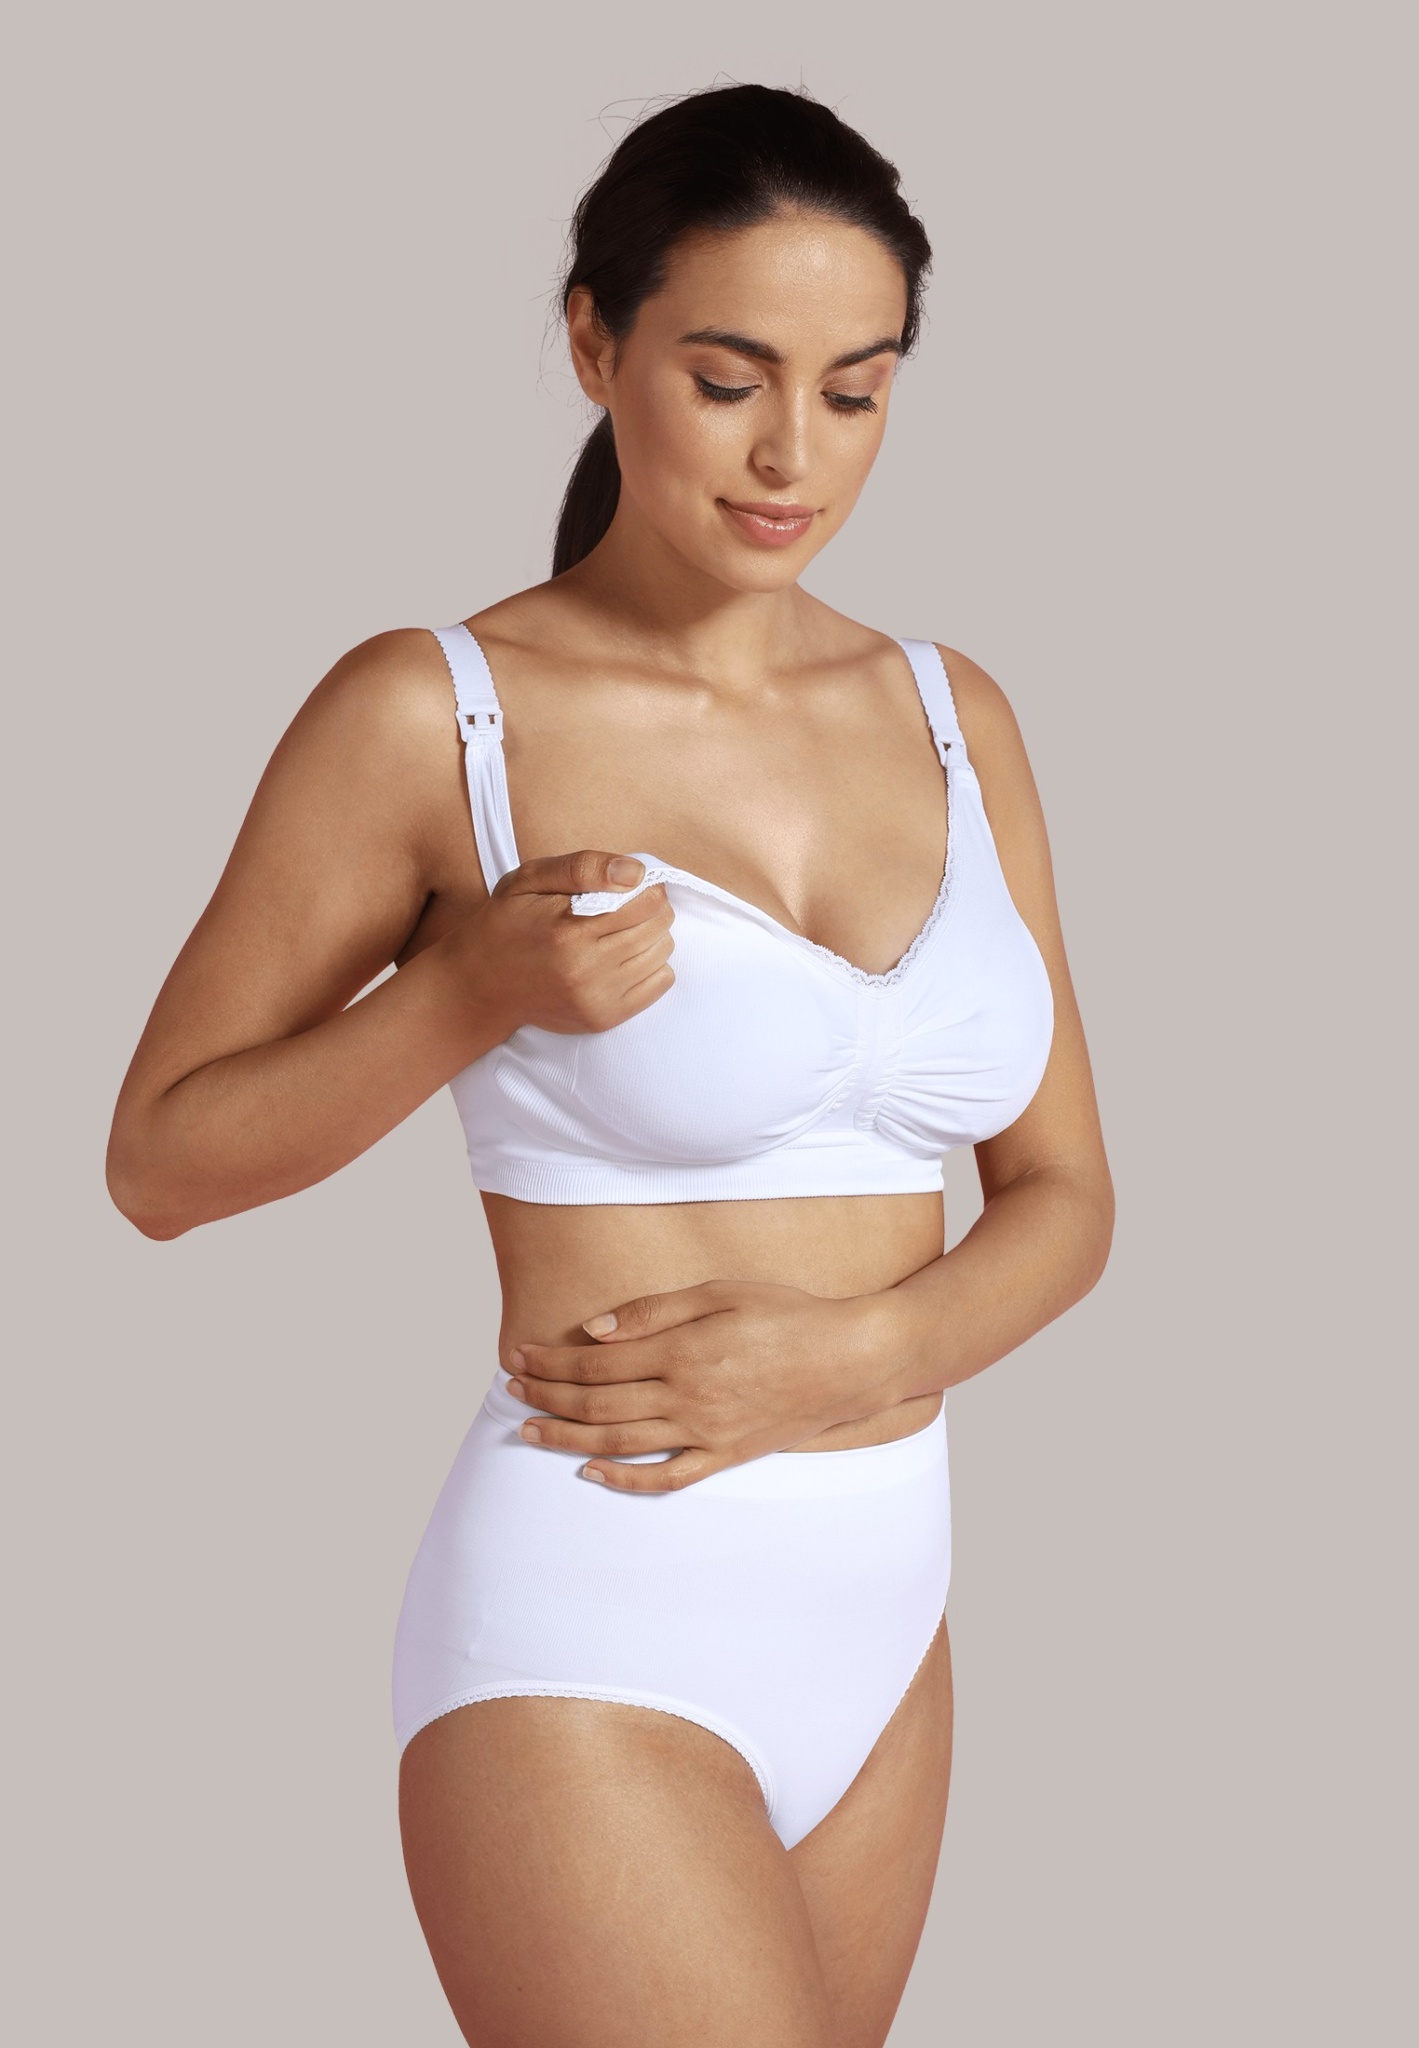 Carriwell South Africa - According to statistics, 80% of women wear the  incorrect bra size. It is essential to select a maternity and nursing bra  that fits correctly, is comfortable, offers the